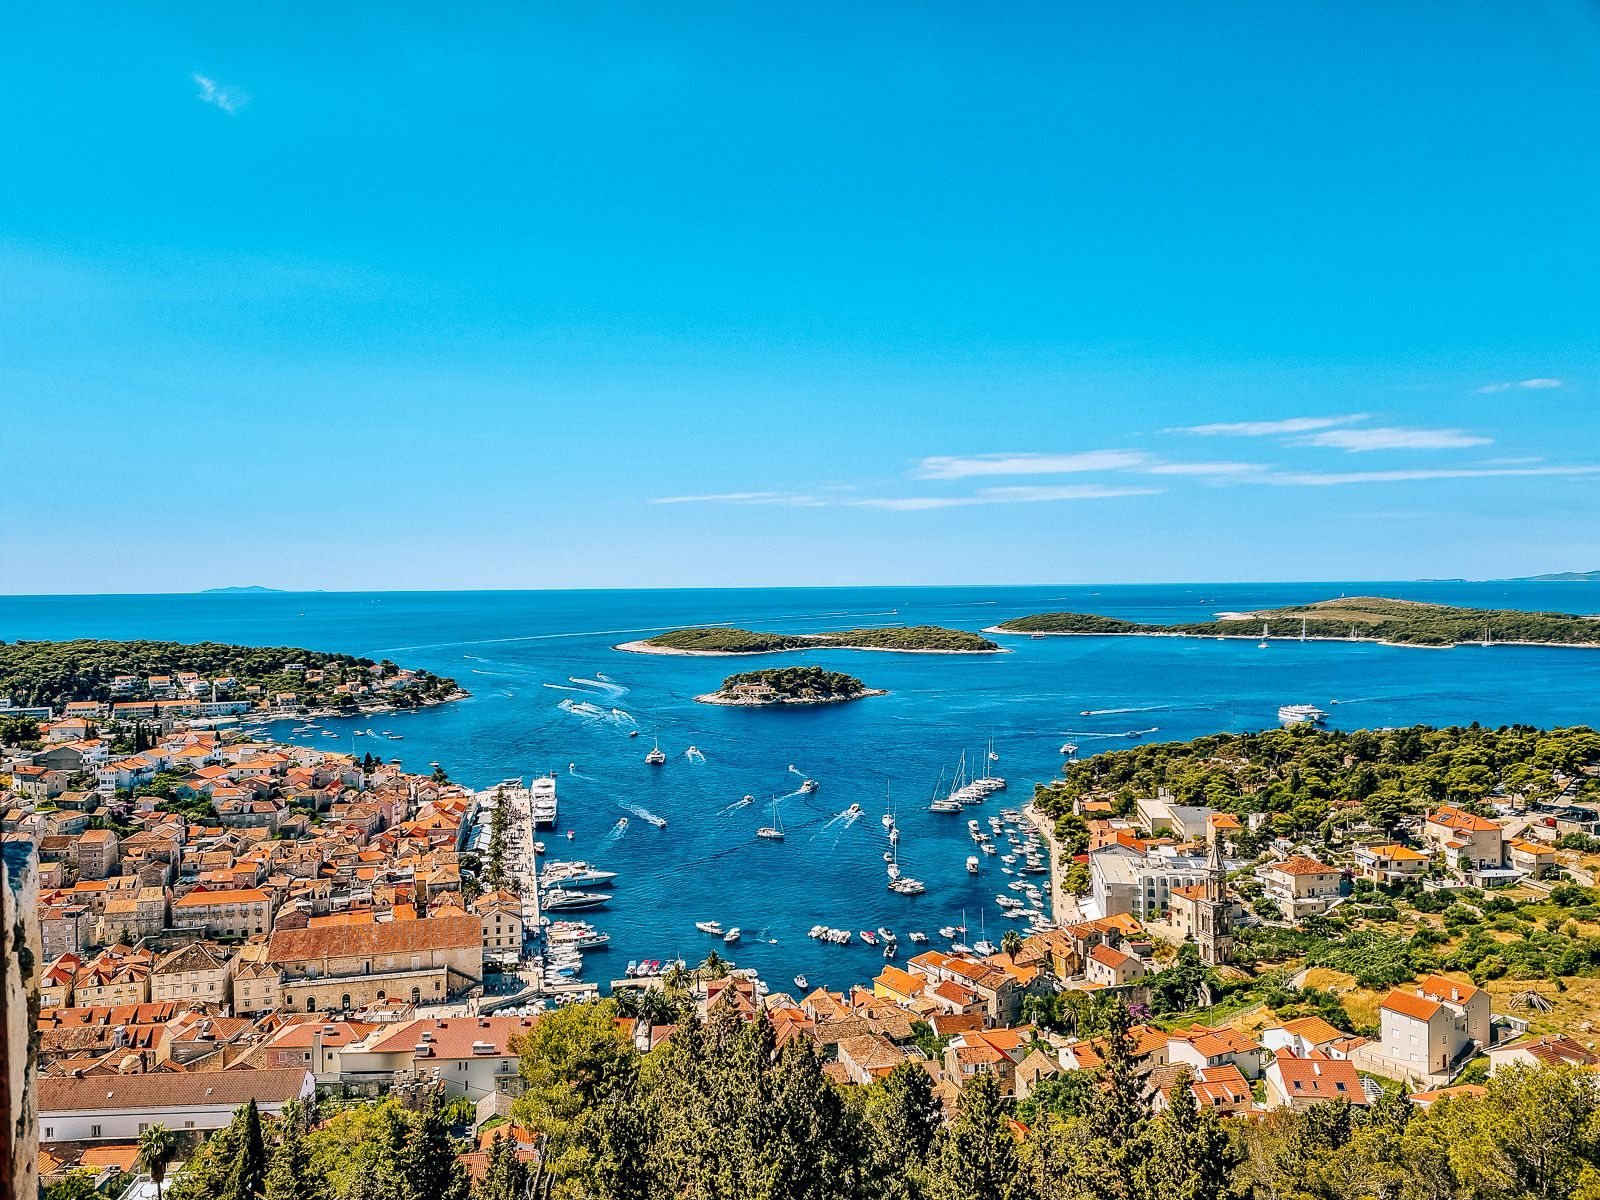 Panoramic view over Hvar from the fortress hill. Hundreds of orange rooftops around a harbour area with bright blue sea and dozens of boats docked or cruising. Islands in the distance